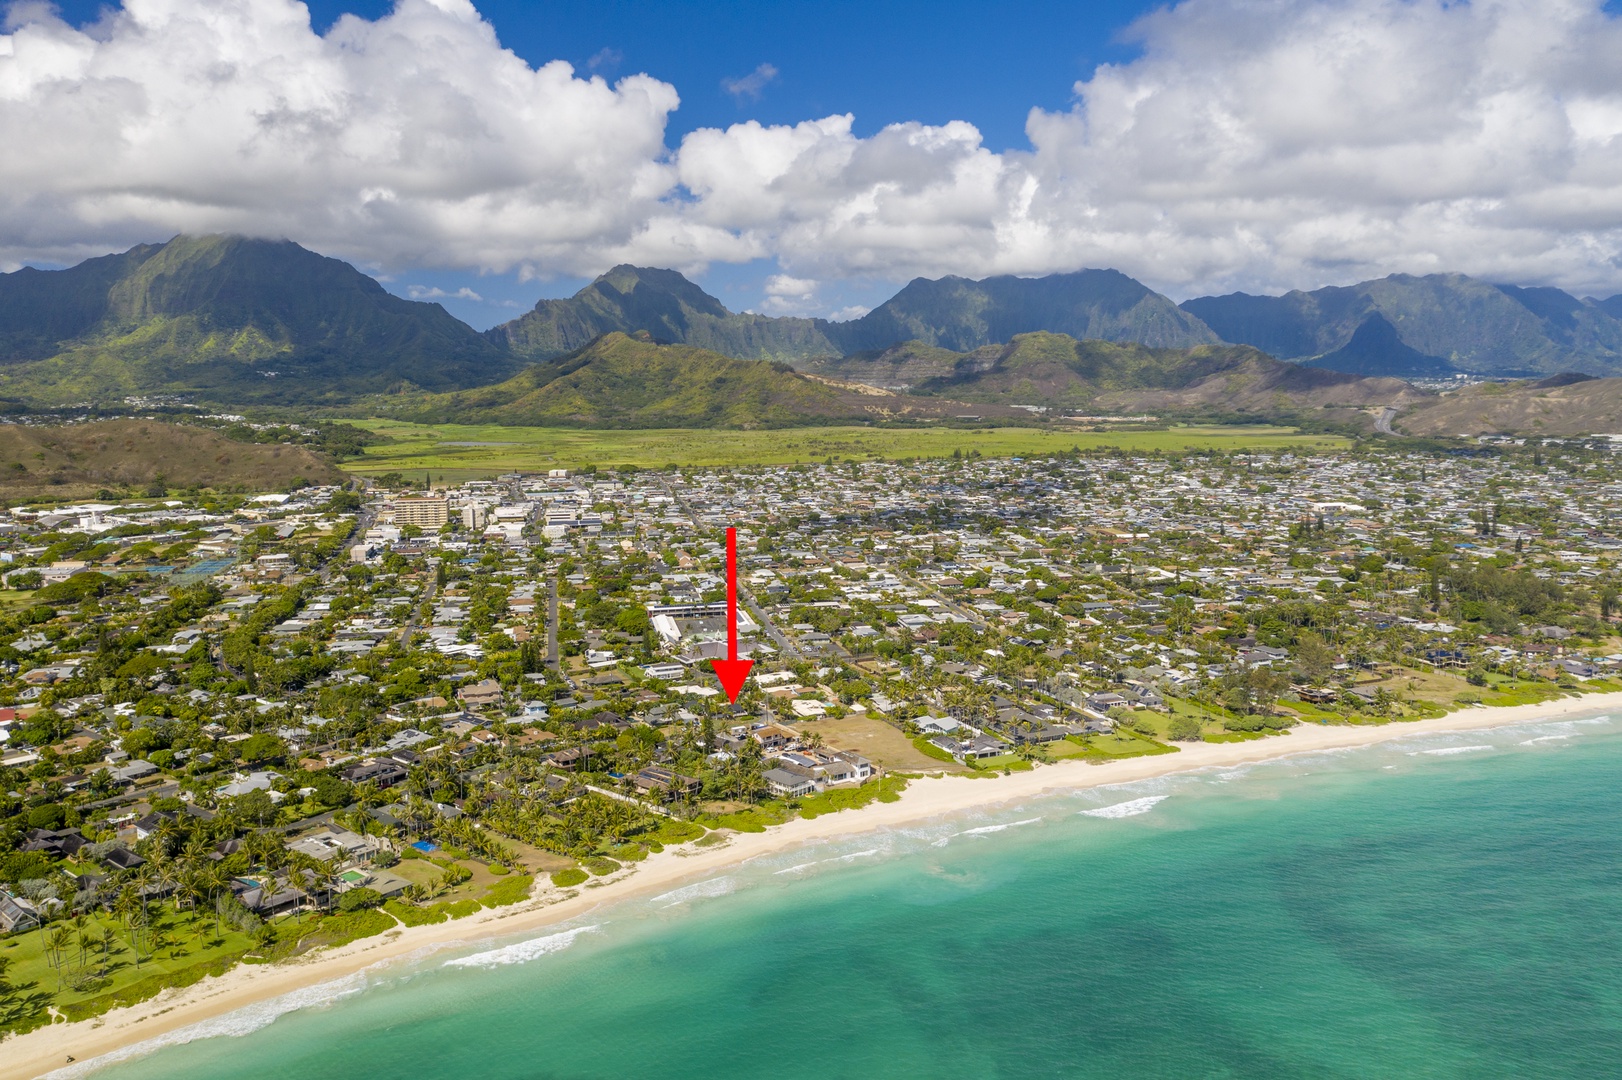 Kailua Vacation Rentals, Ranch Beach House - Property is just steps away from Kailua Beach